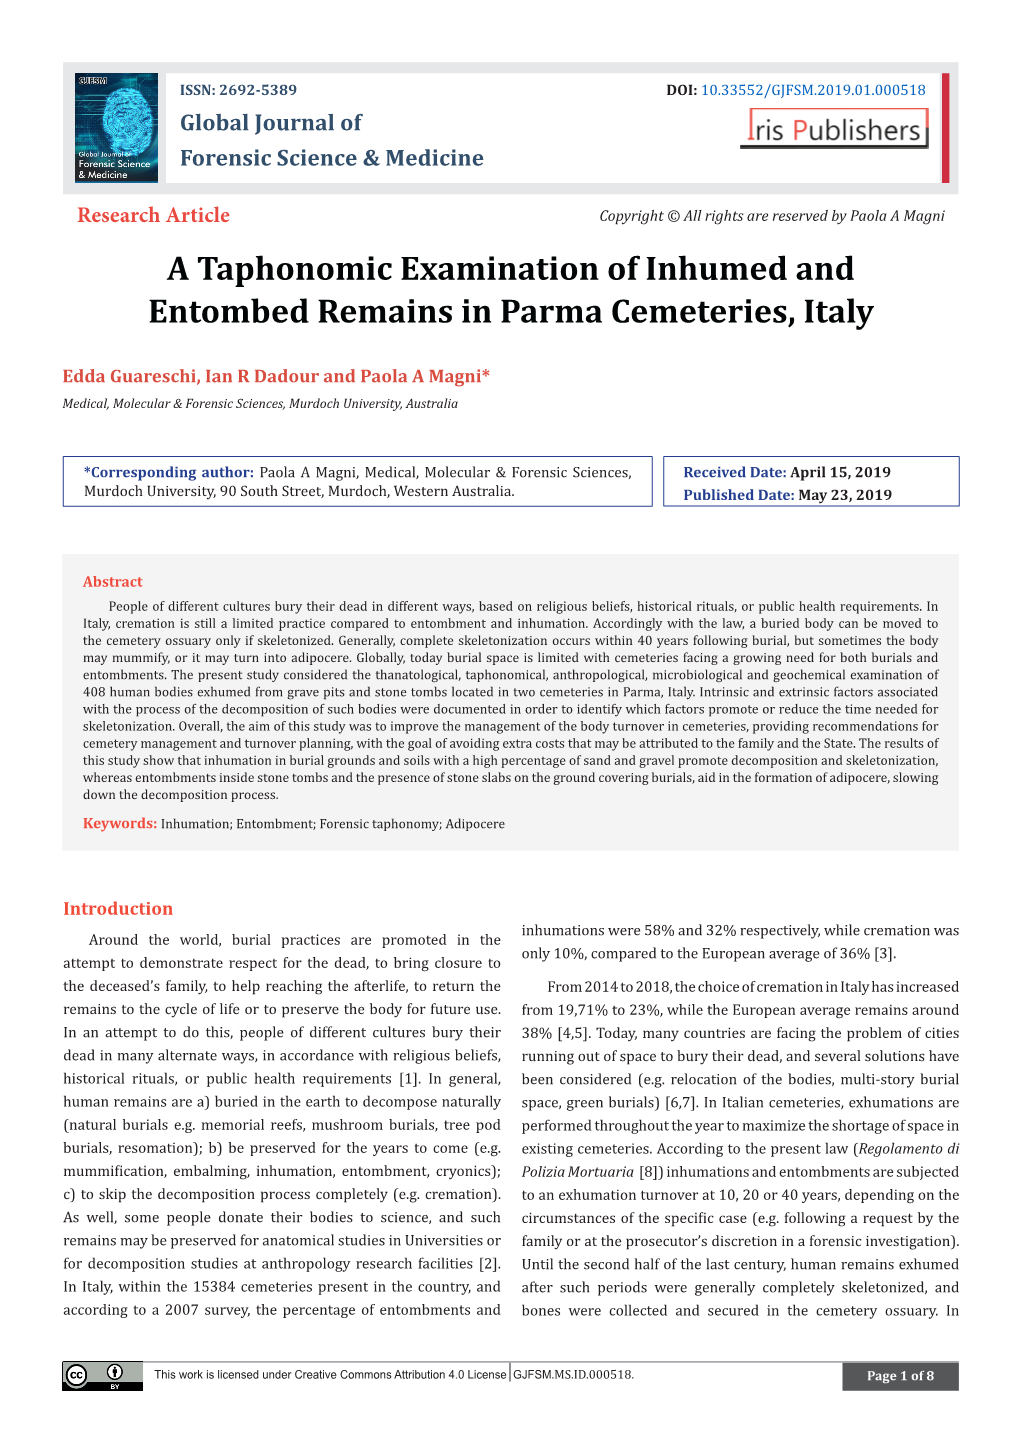 A Taphonomic Examination of Inhumed and Entombed Remains in Parma Cemeteries, Italy